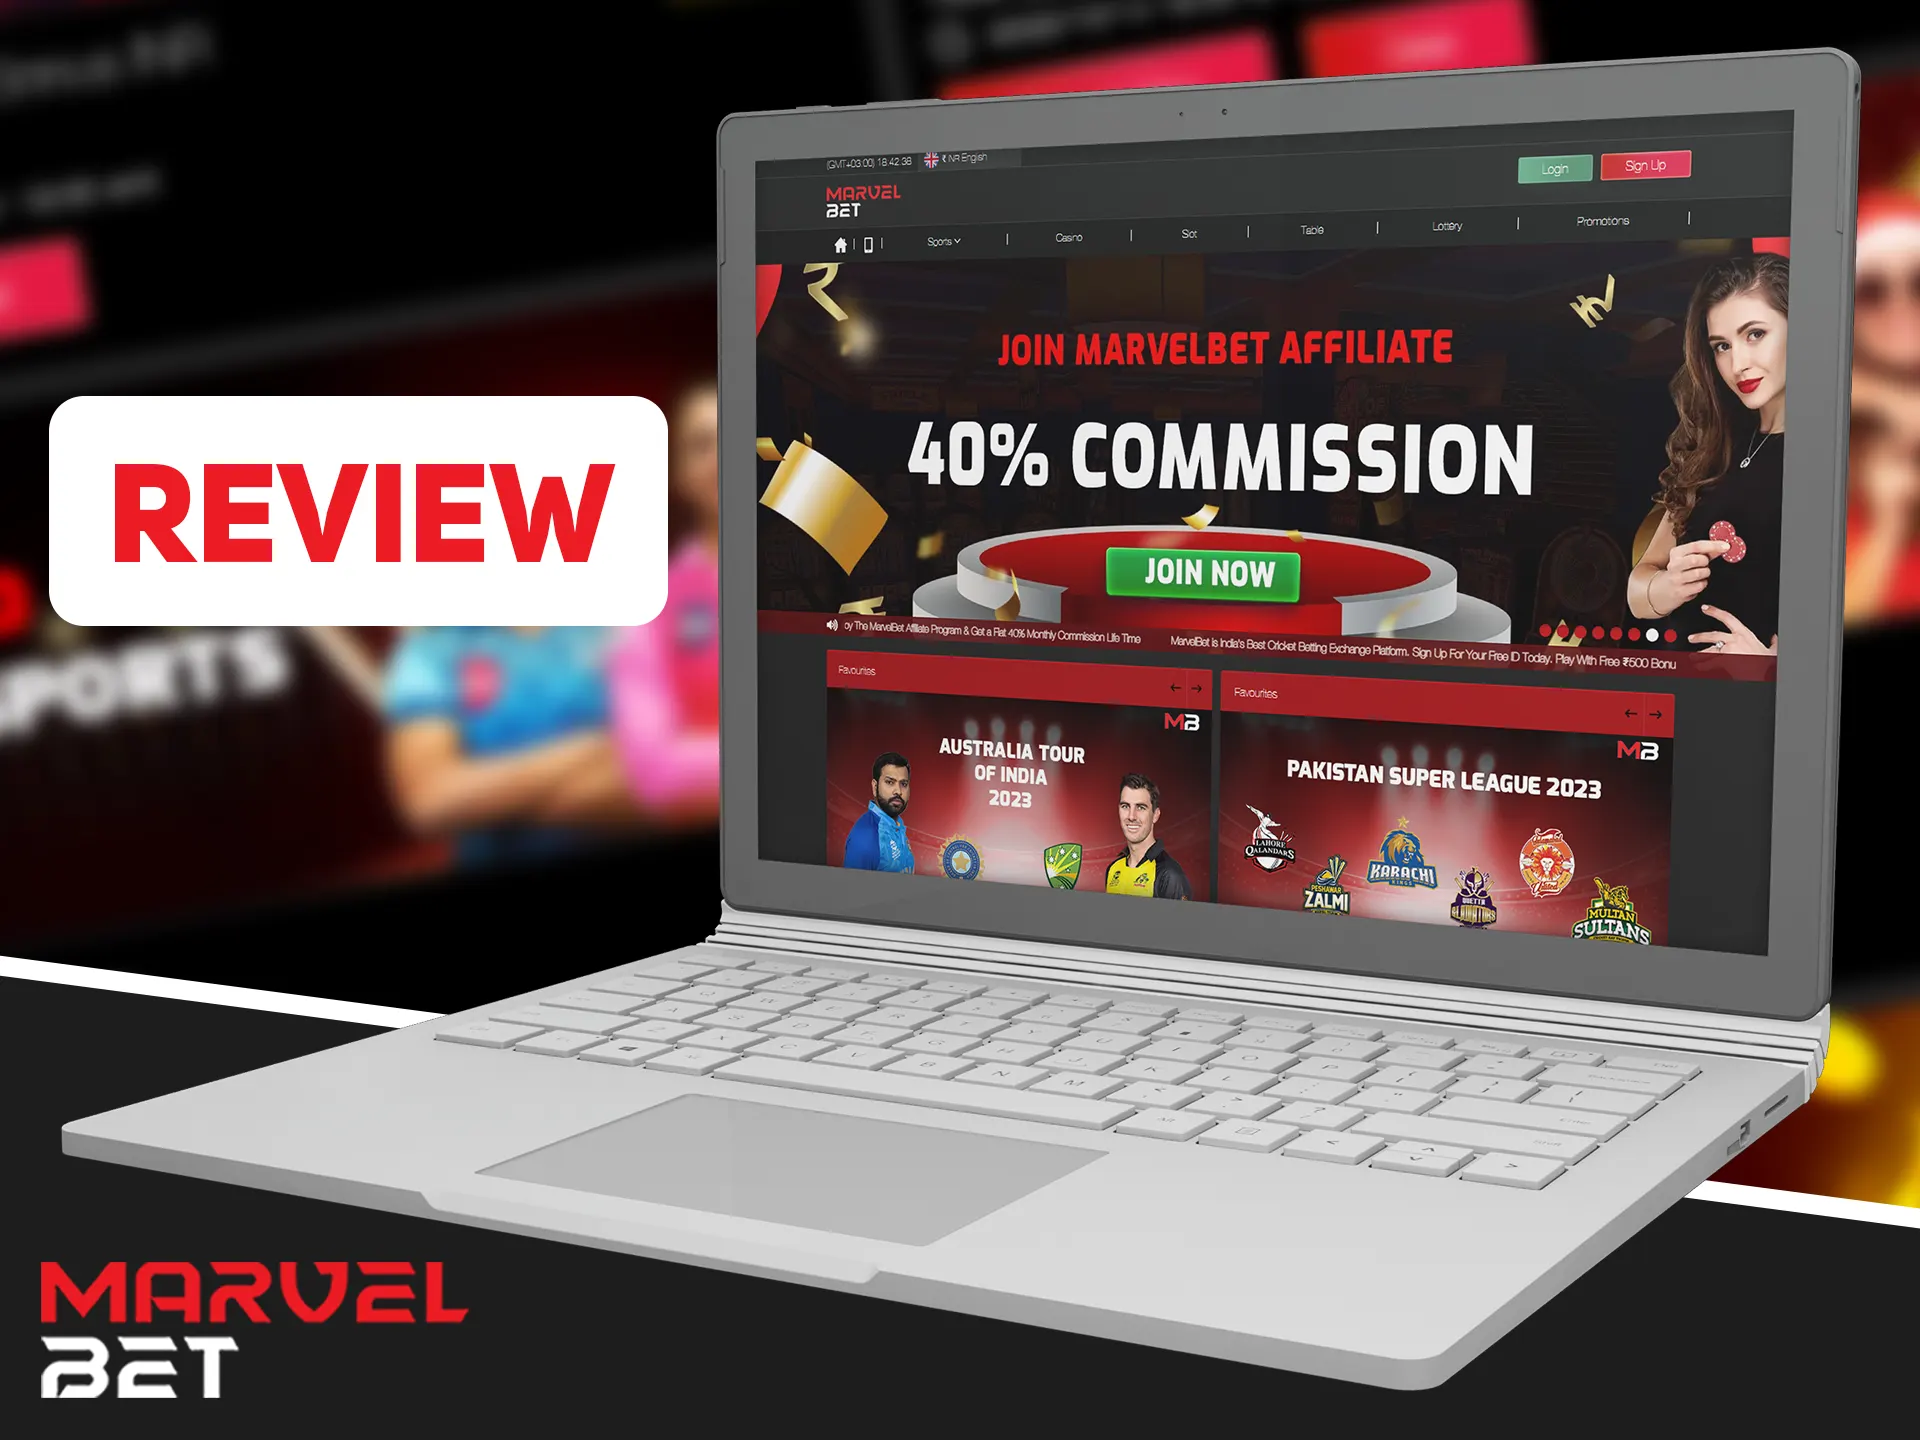 Marvelbet betting company is a great place to spend time at.